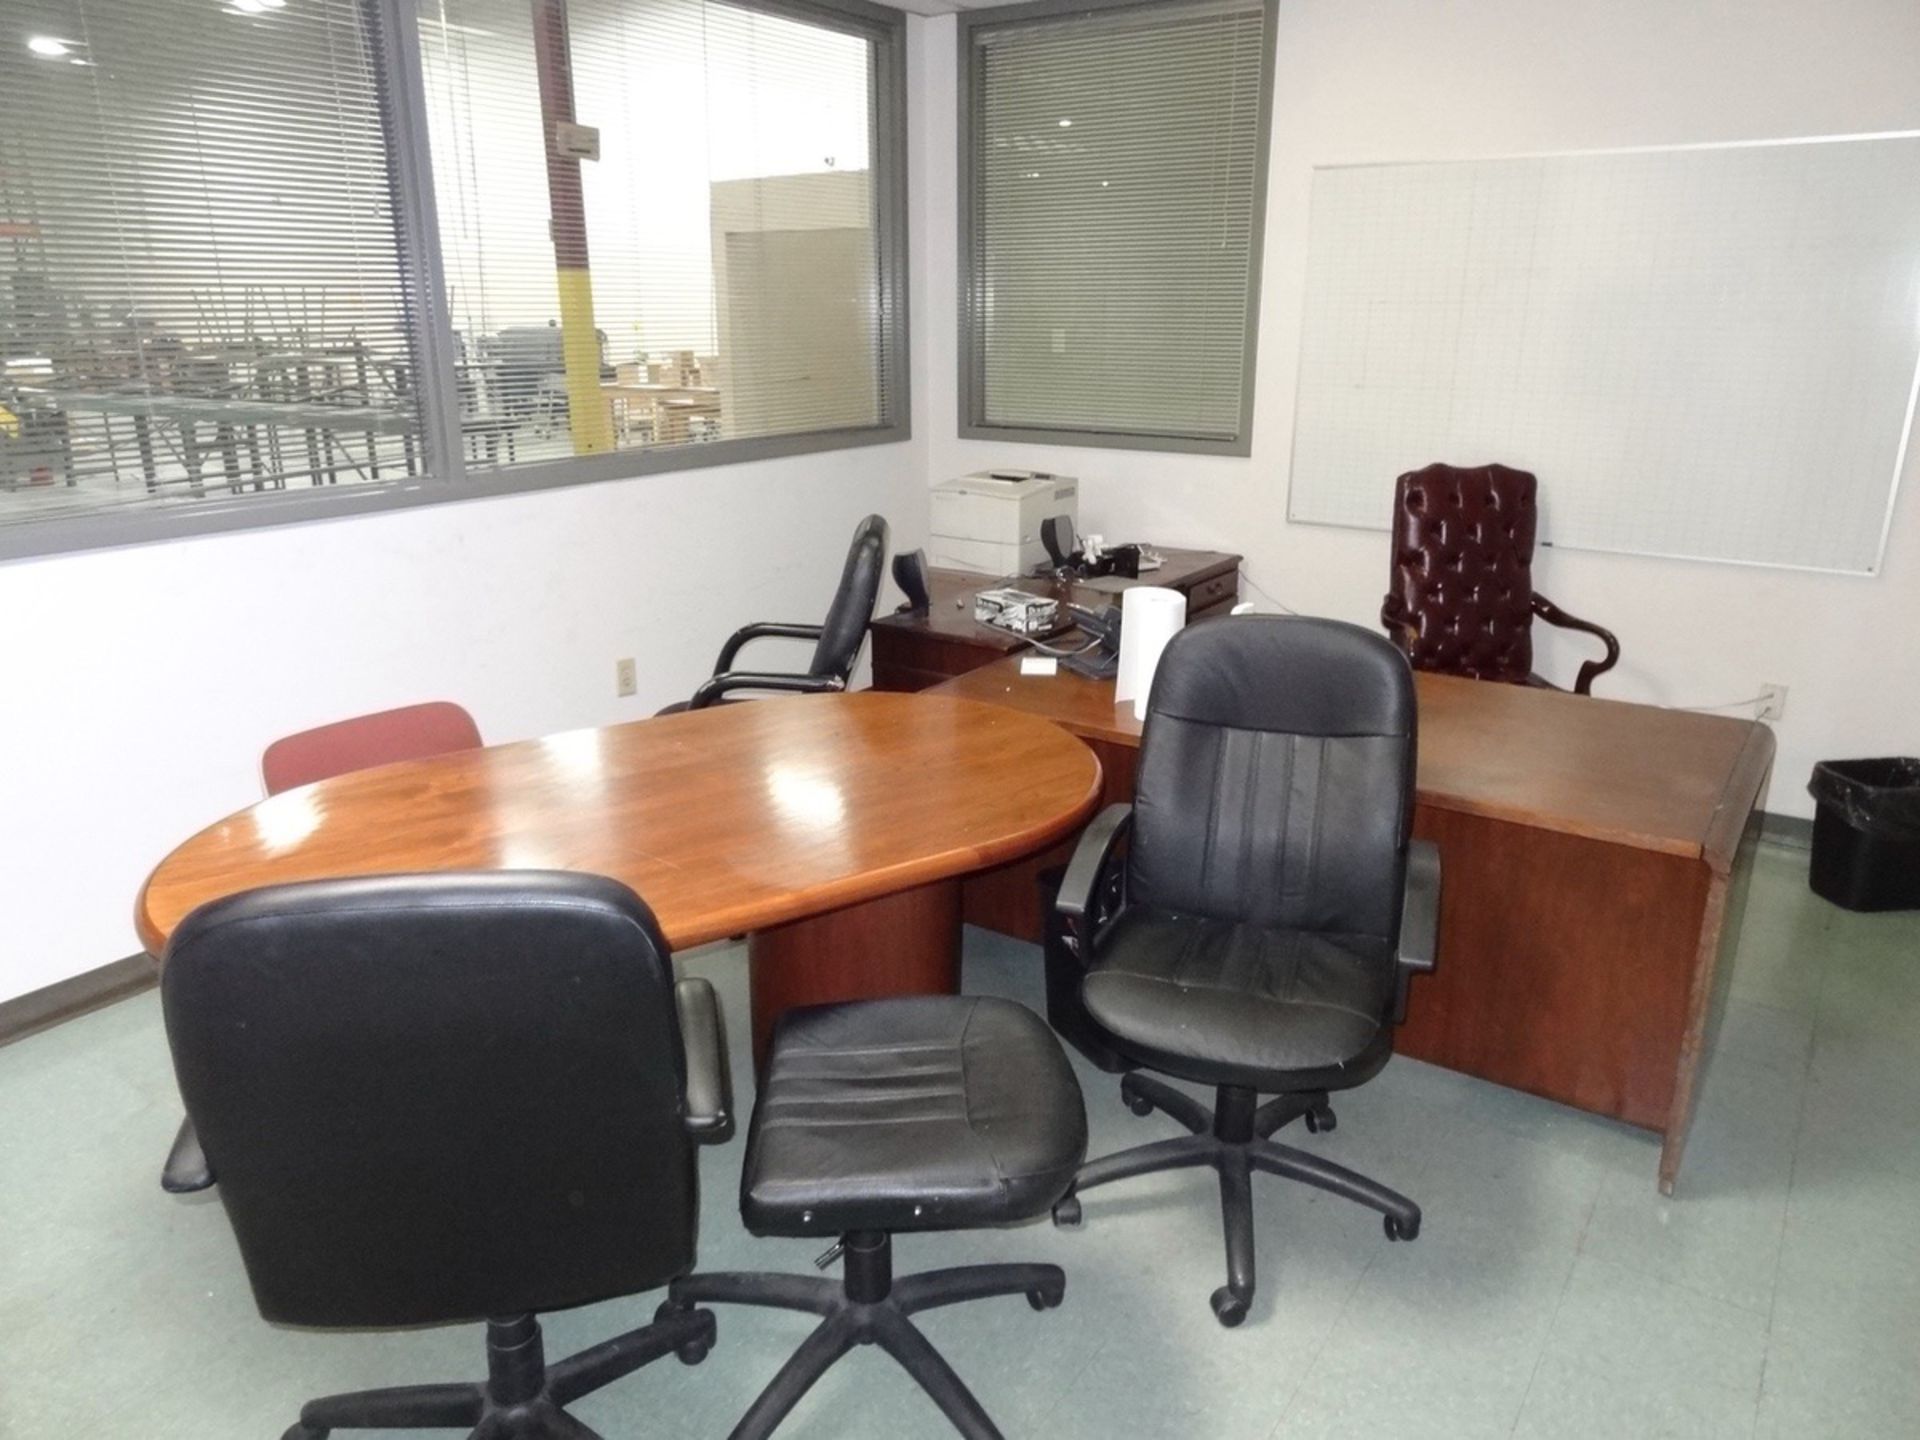 Office 13 - Desk And Chair, Oval Table And 4 Chairs | Rig Fee: See Full Desc